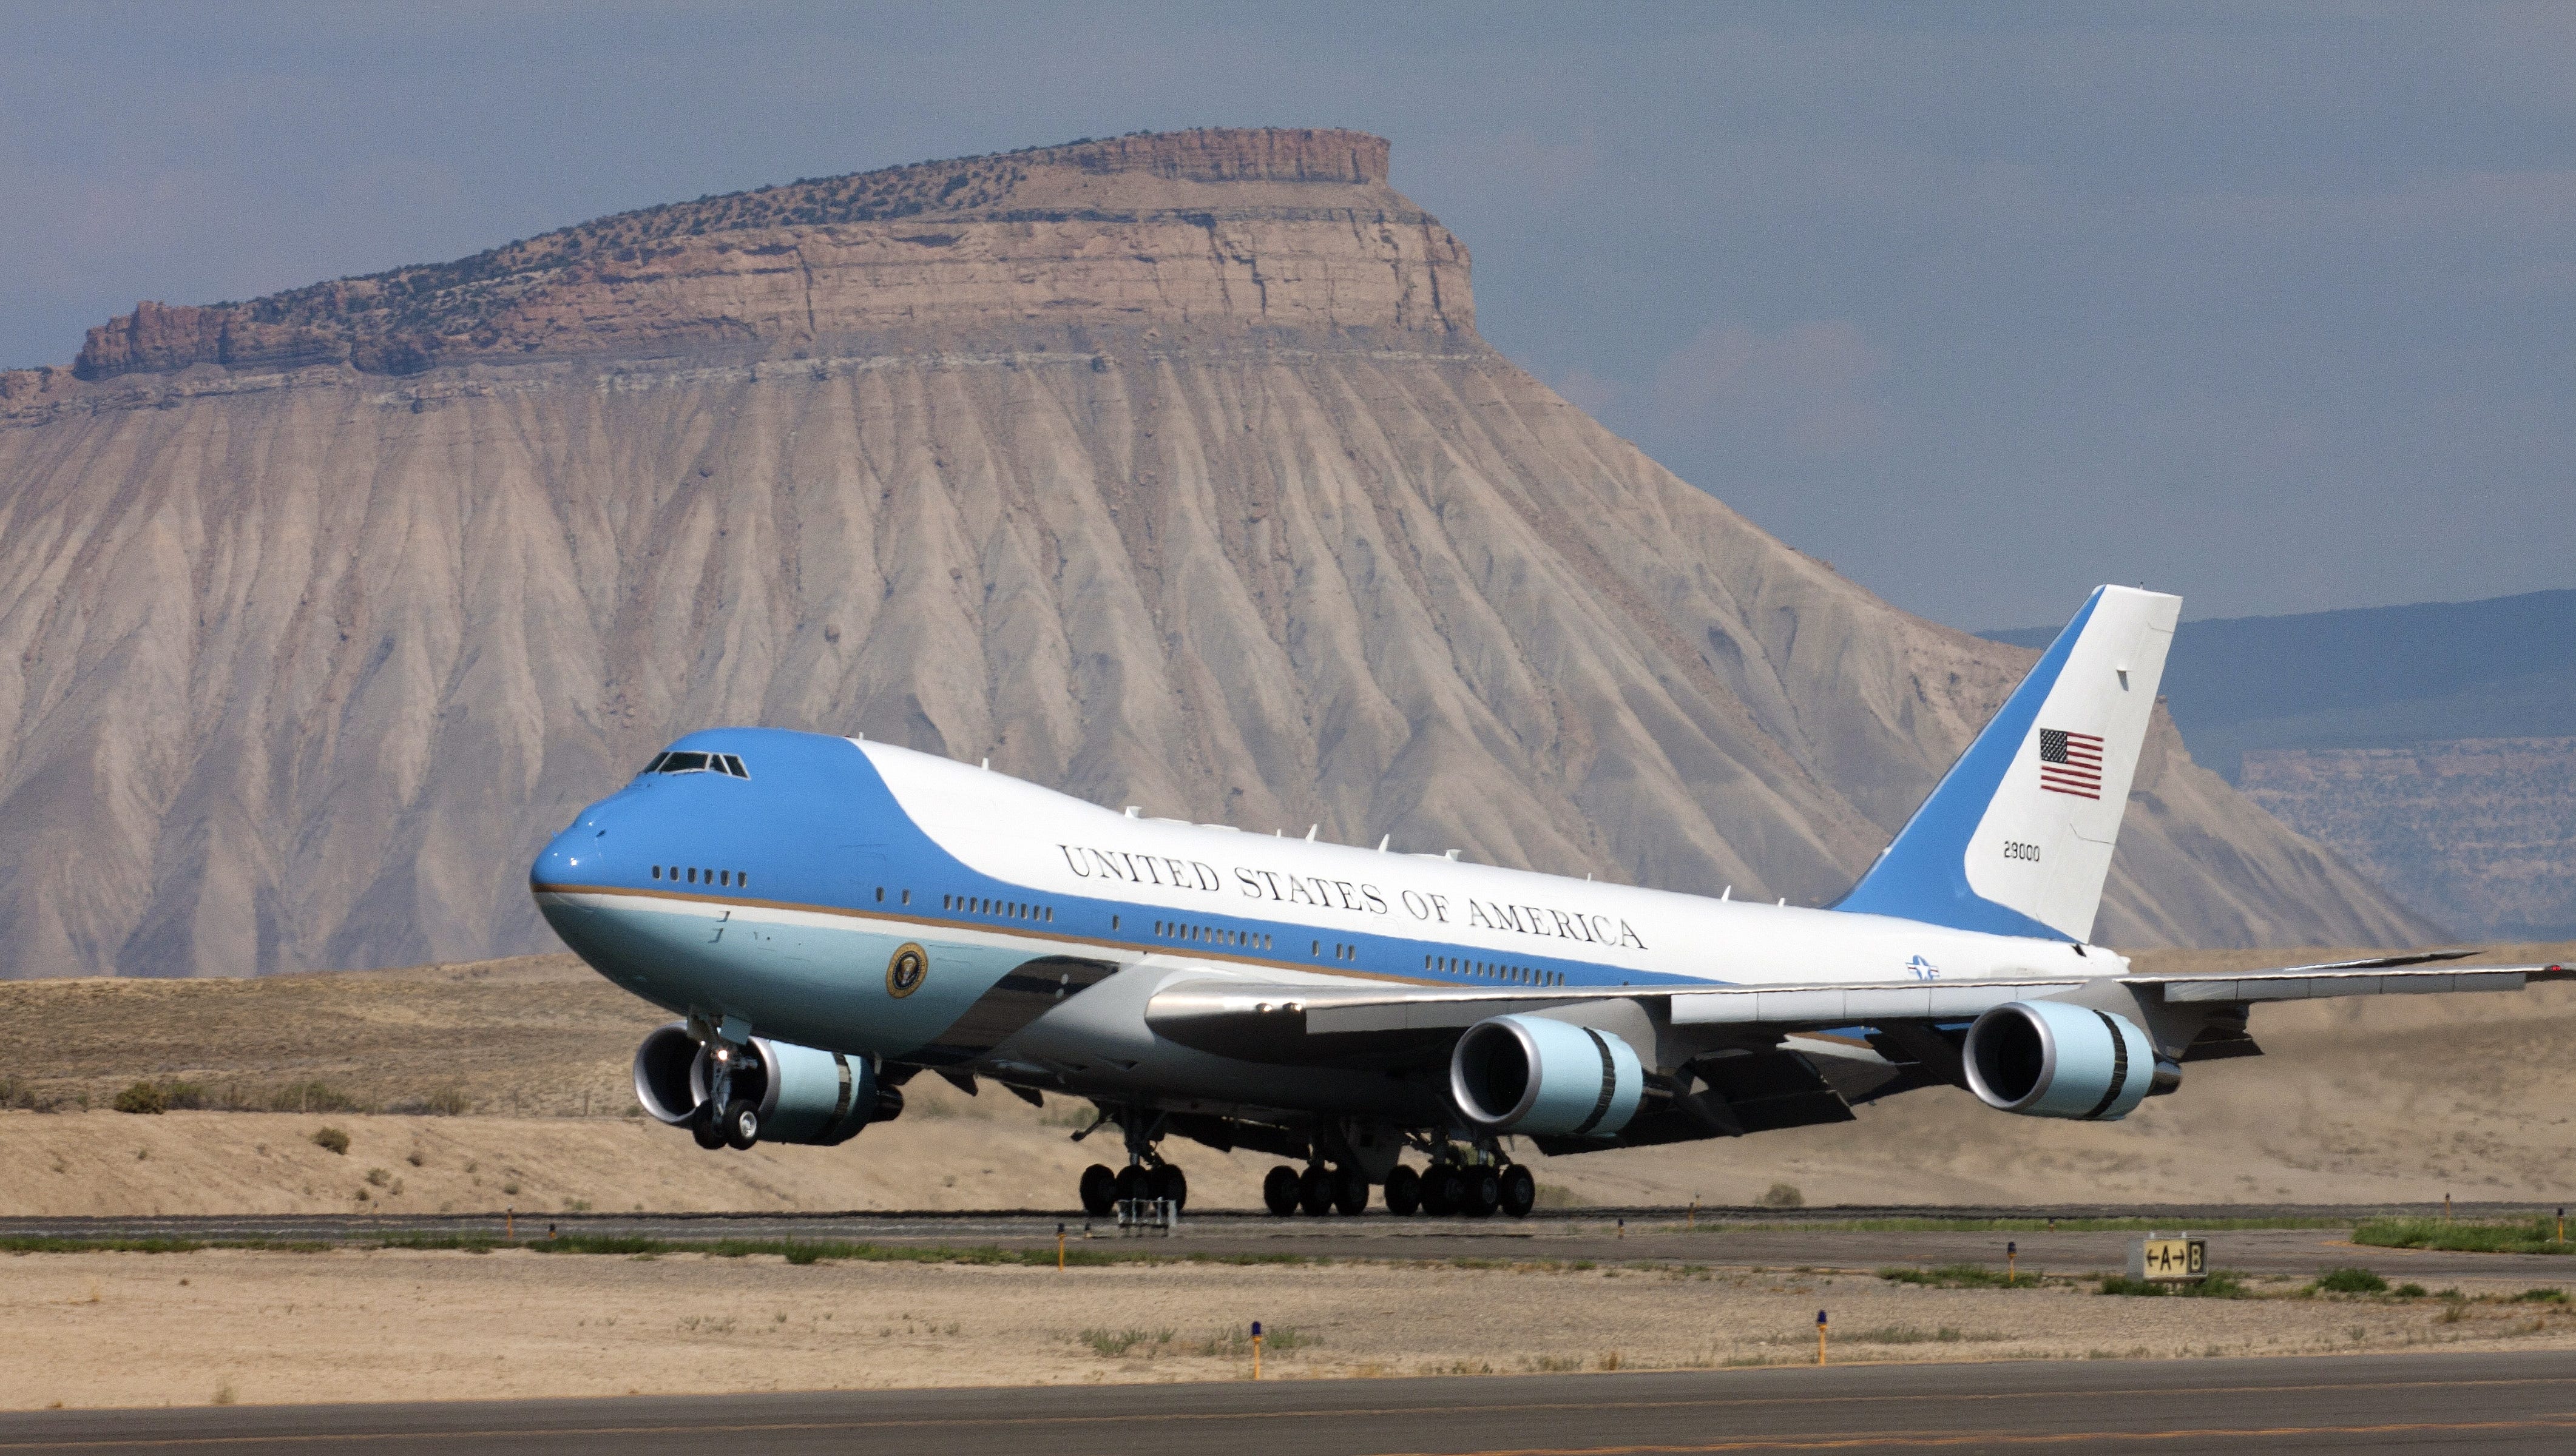 Air traffic control for Air Force One